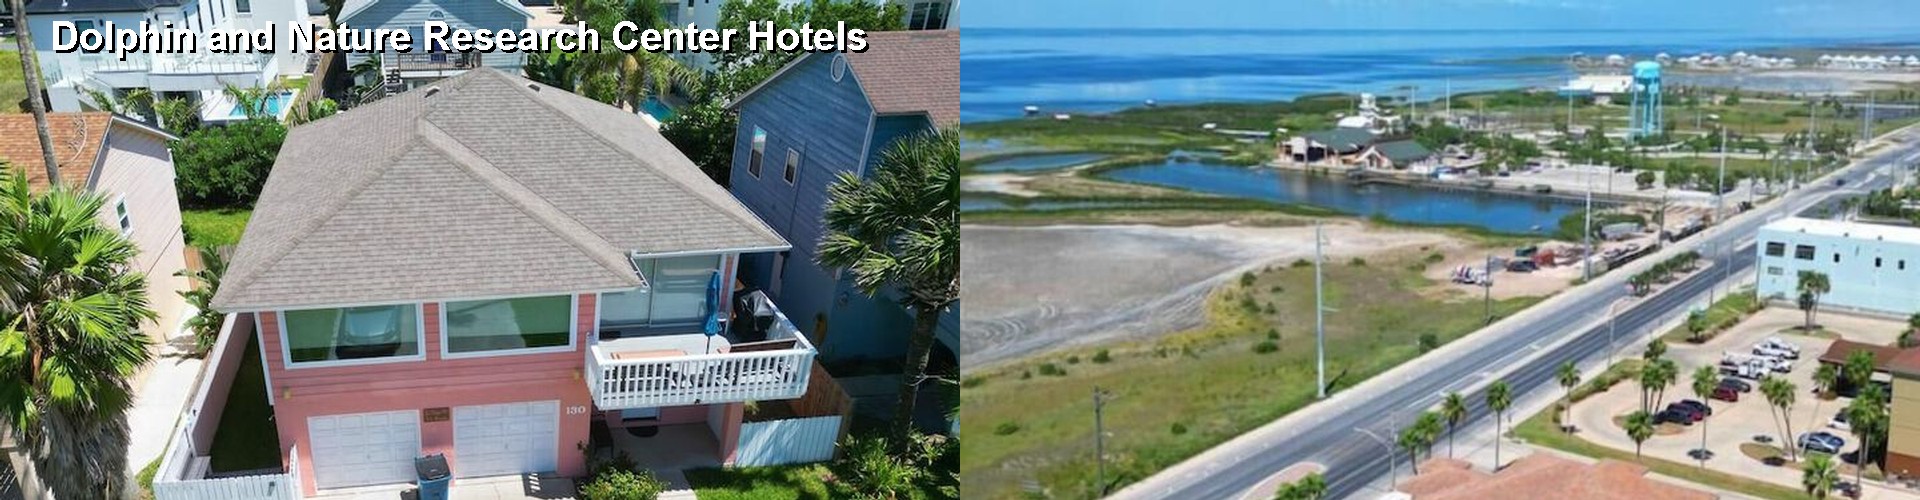 5 Best Hotels near Dolphin and Nature Research Center